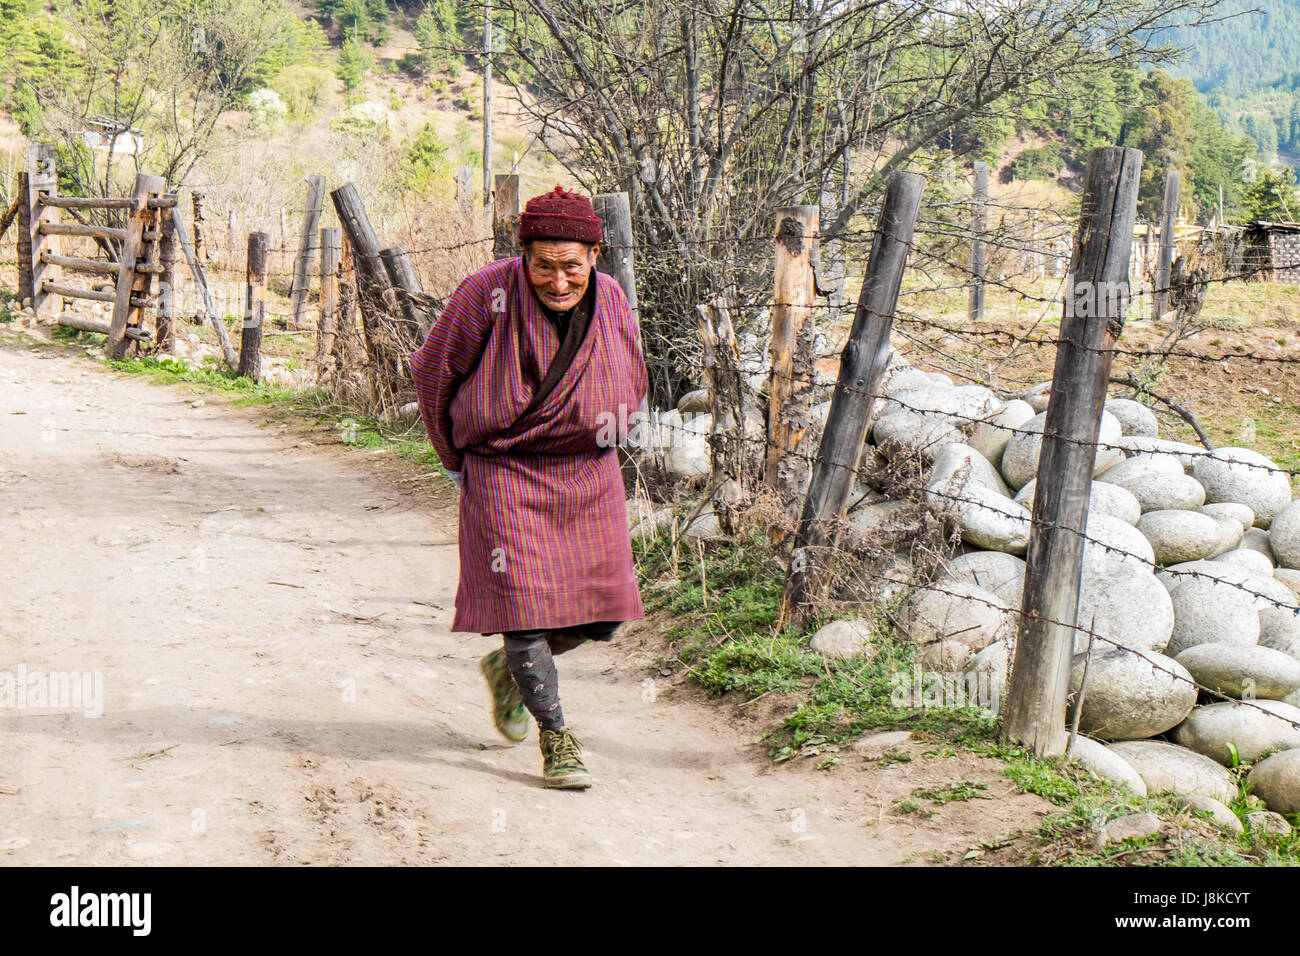 Man walking on dirt road along a livestock farm in a remote village in Central Bhutan. Stock Photo